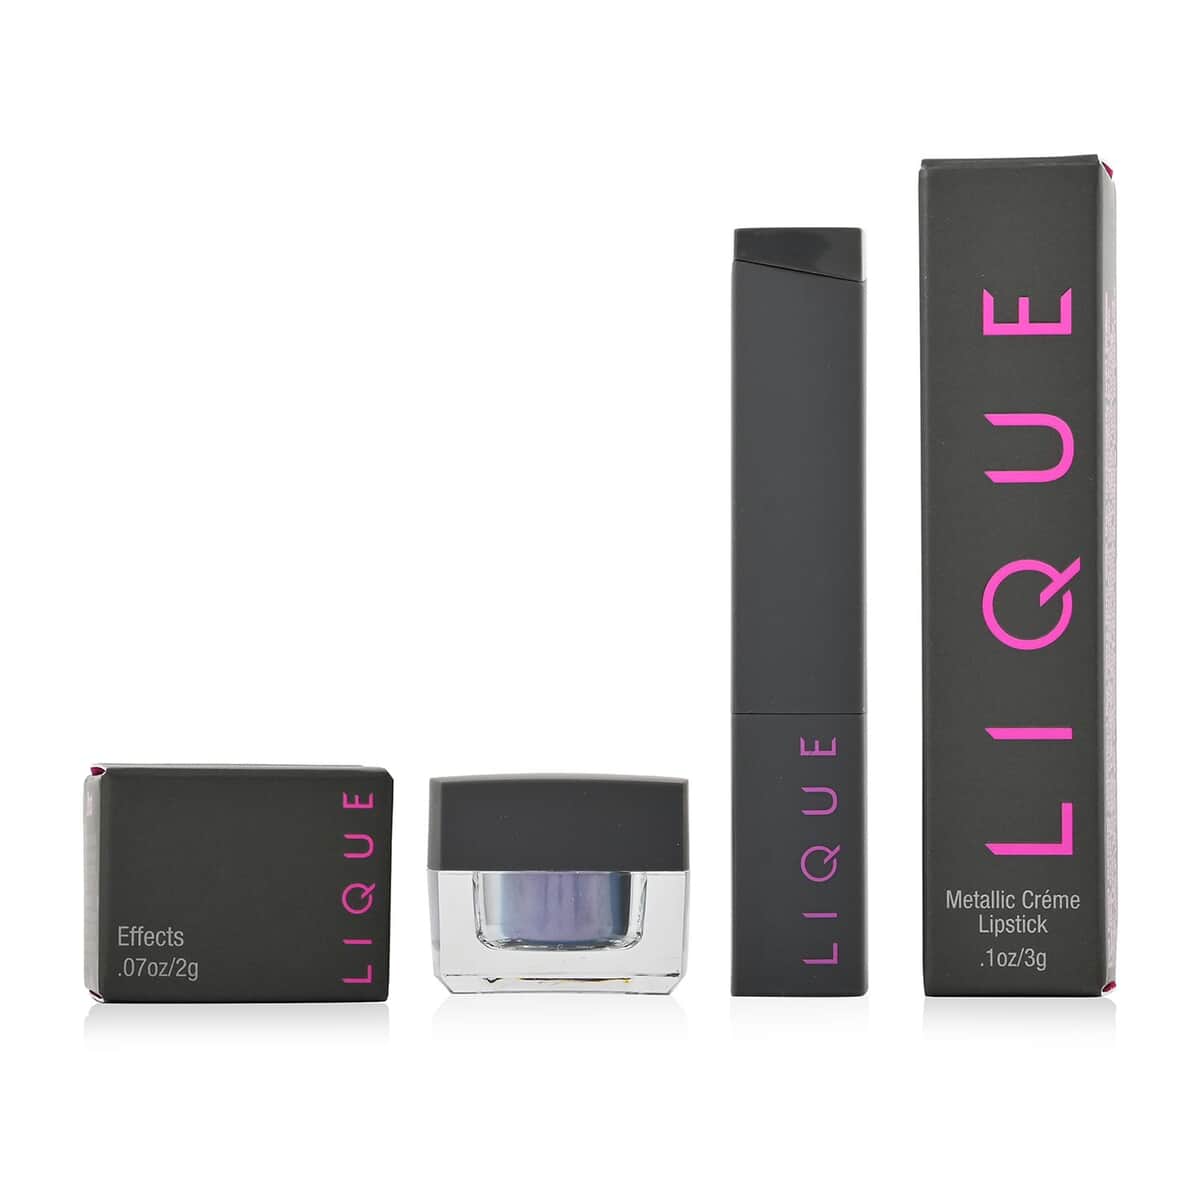 Closeout Lique Set of 2 (One Lipstick & One Effect Powder) with Free Set of 2 (One Lipstick & One Effect Powder) image number 0